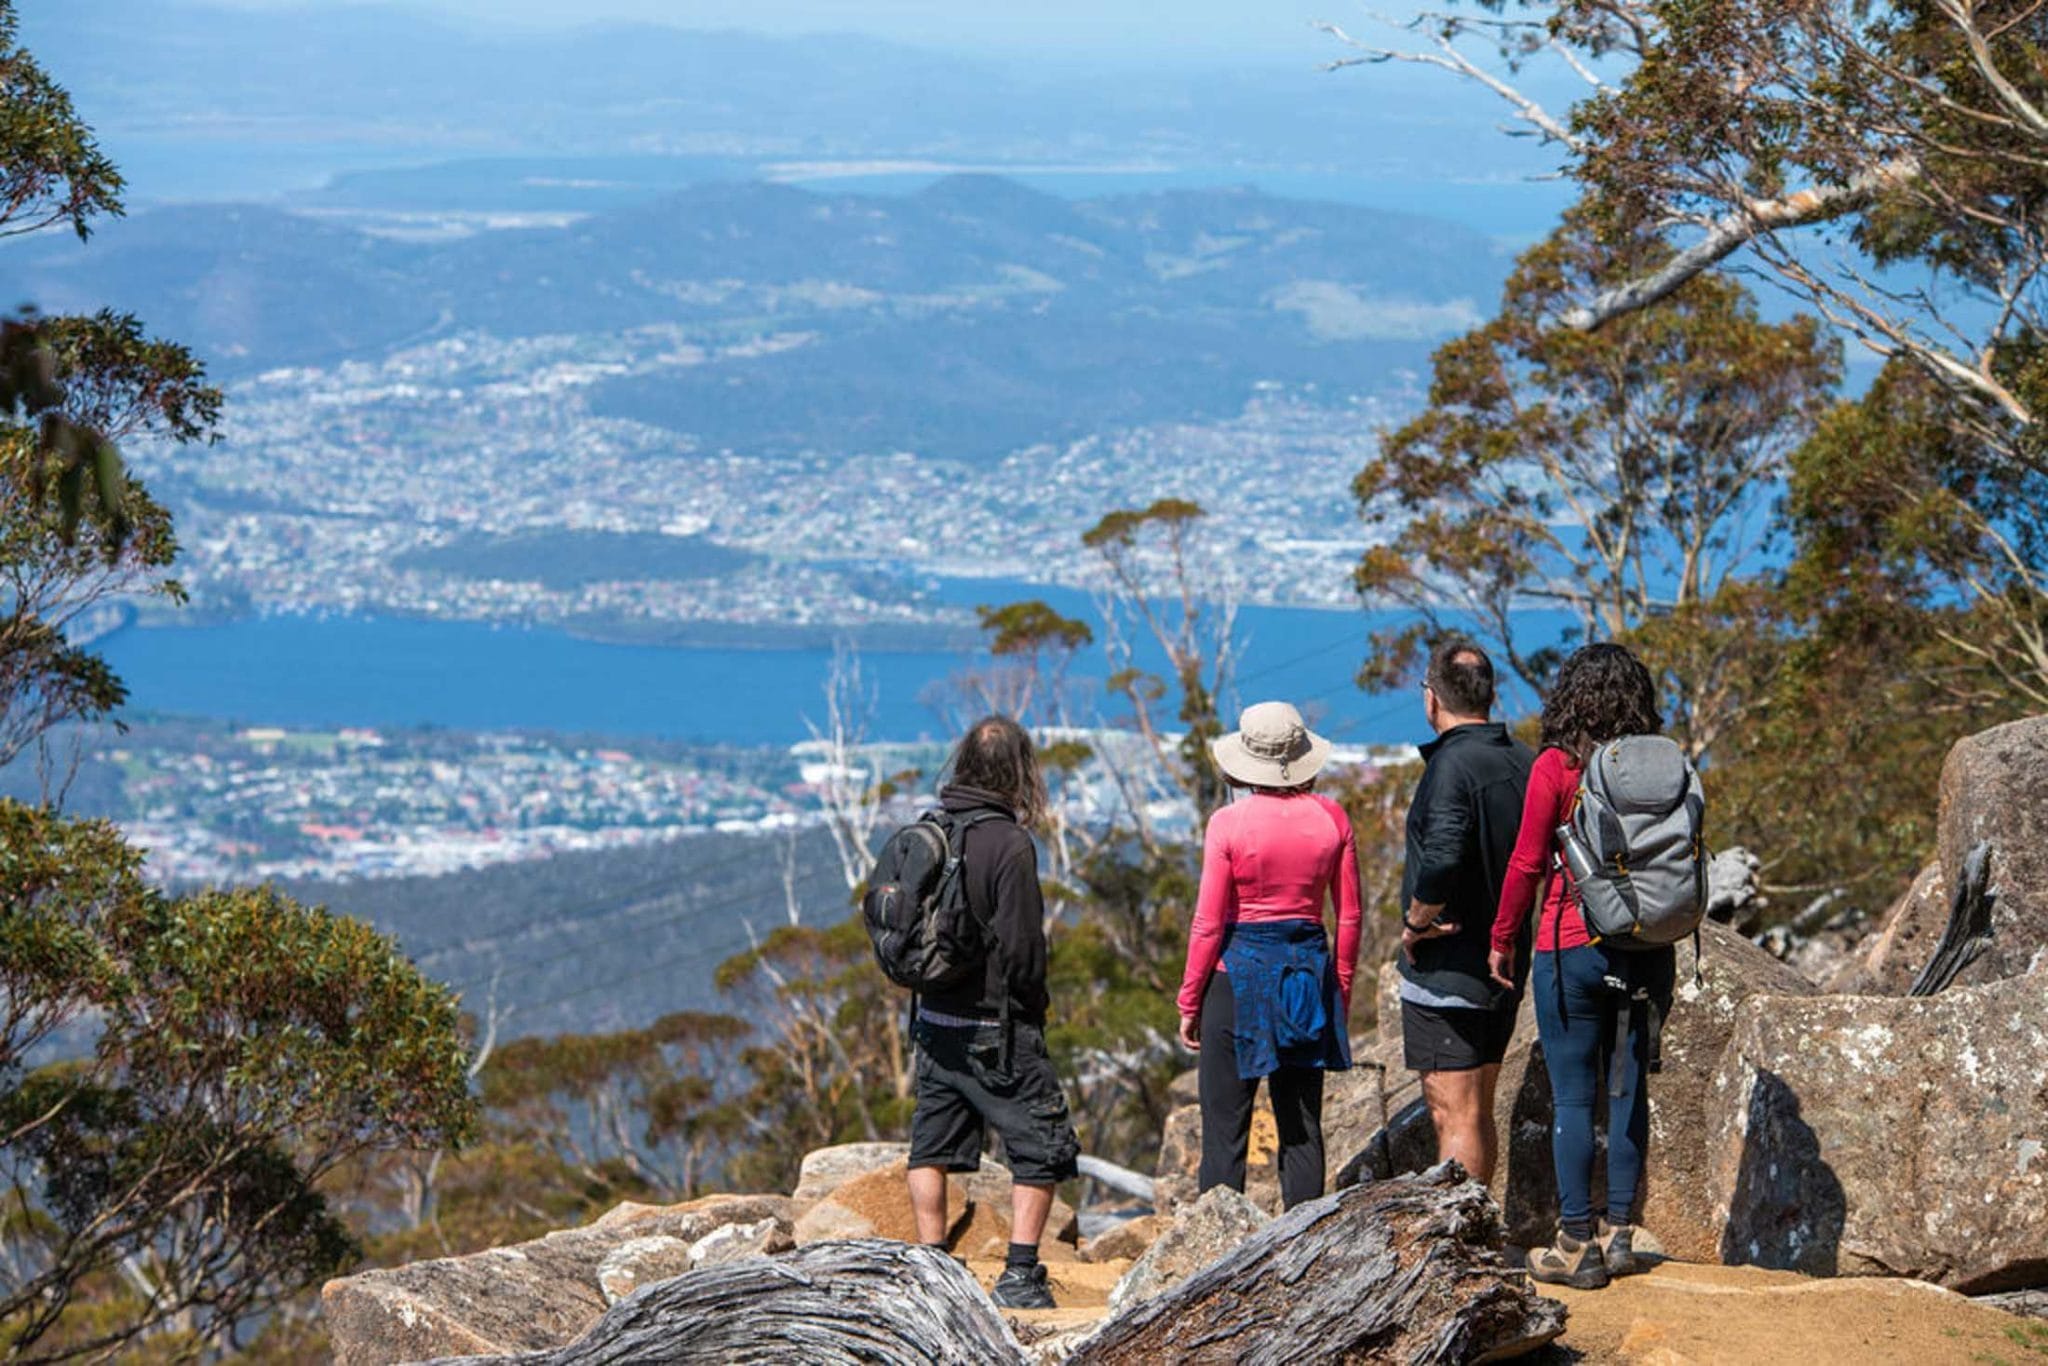 A group of people hiking on a mountain overlooking a city, showcasing the beauty of nature and adventure.